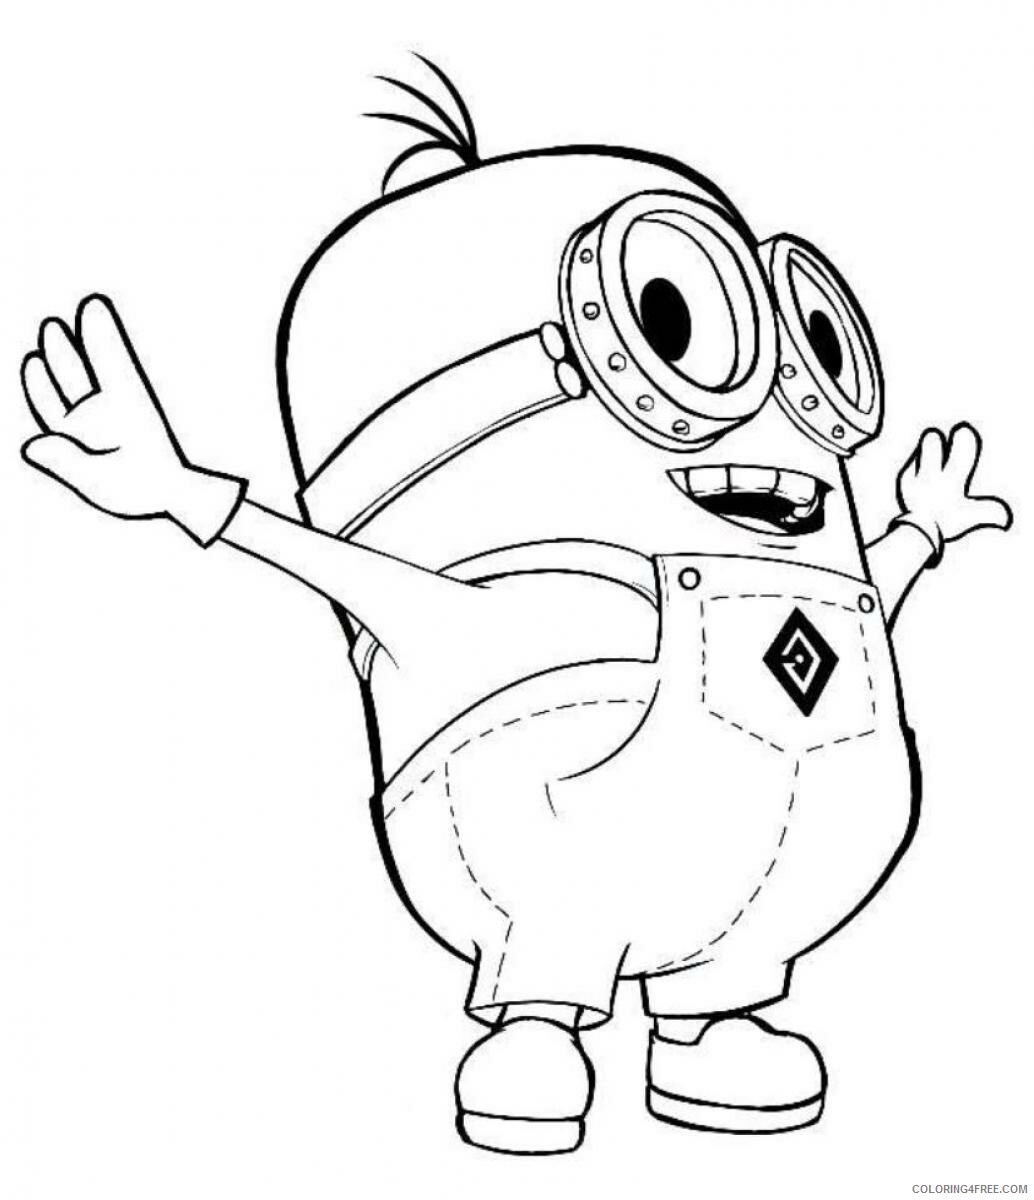 Minions Coloring Pages TV Film Despicable Me Minions 2 Printable 2020 05177 Coloring4free